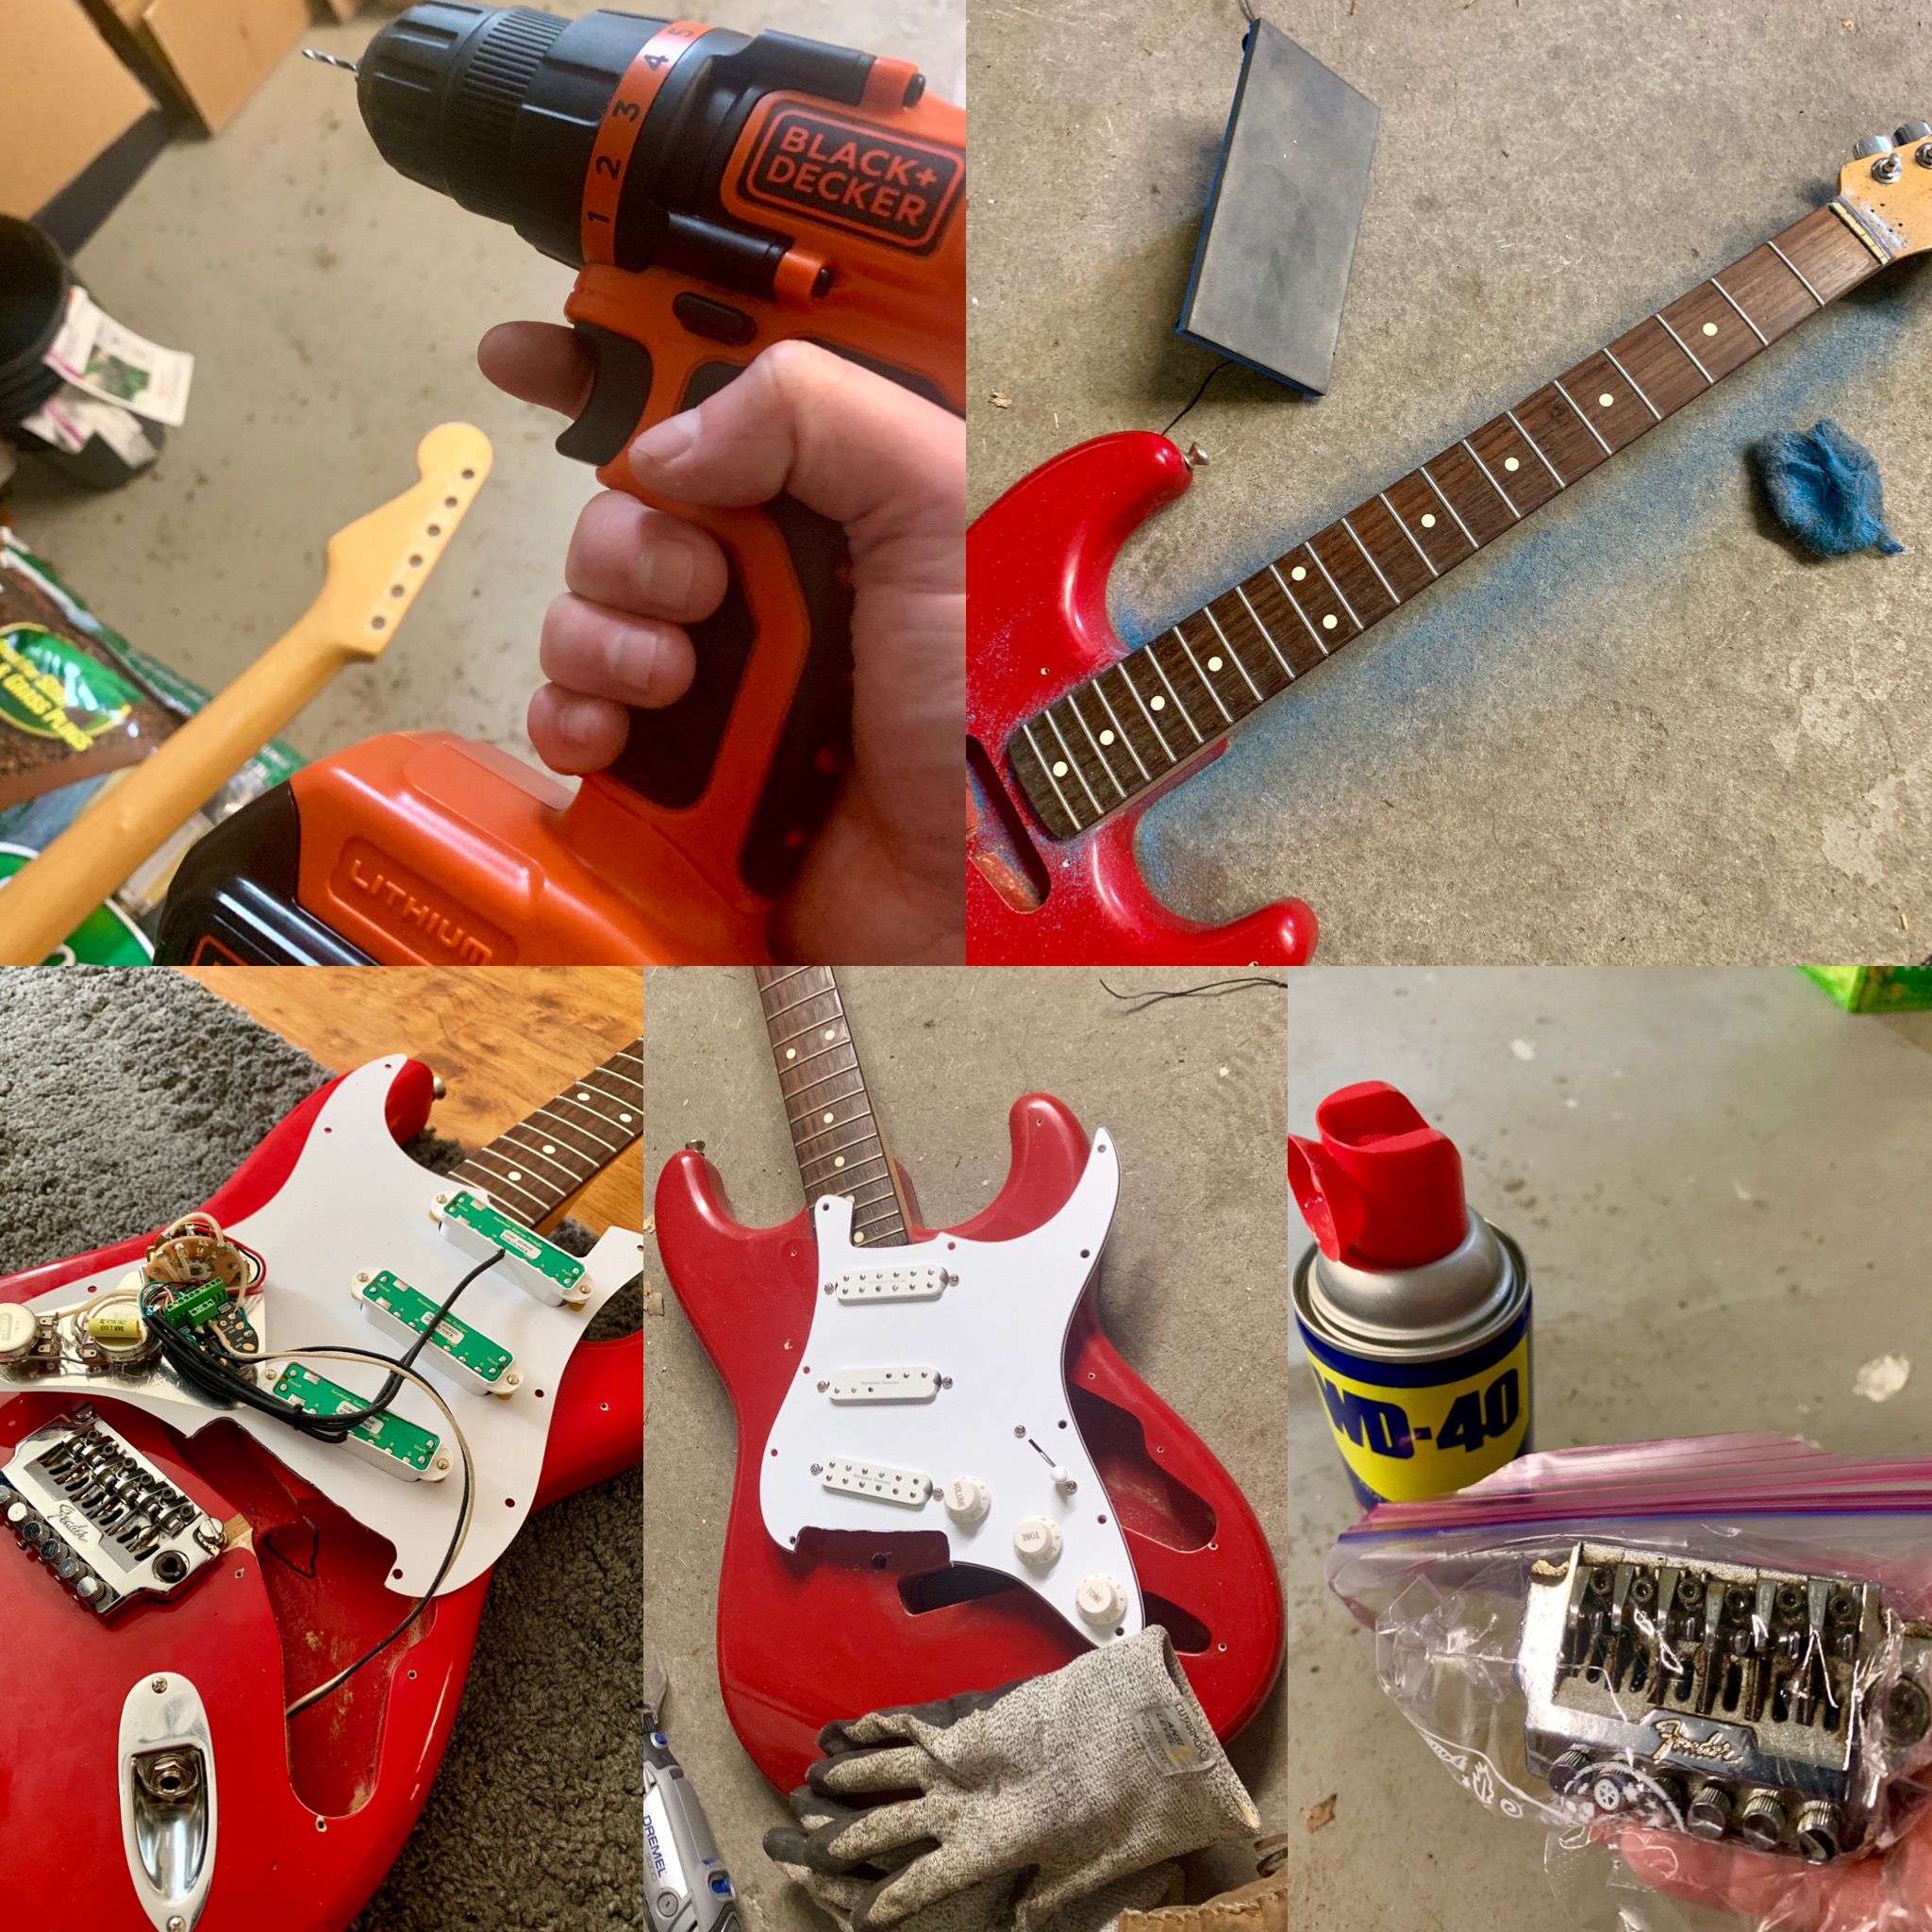 electronics Japanese Fender Stratocaster Squier